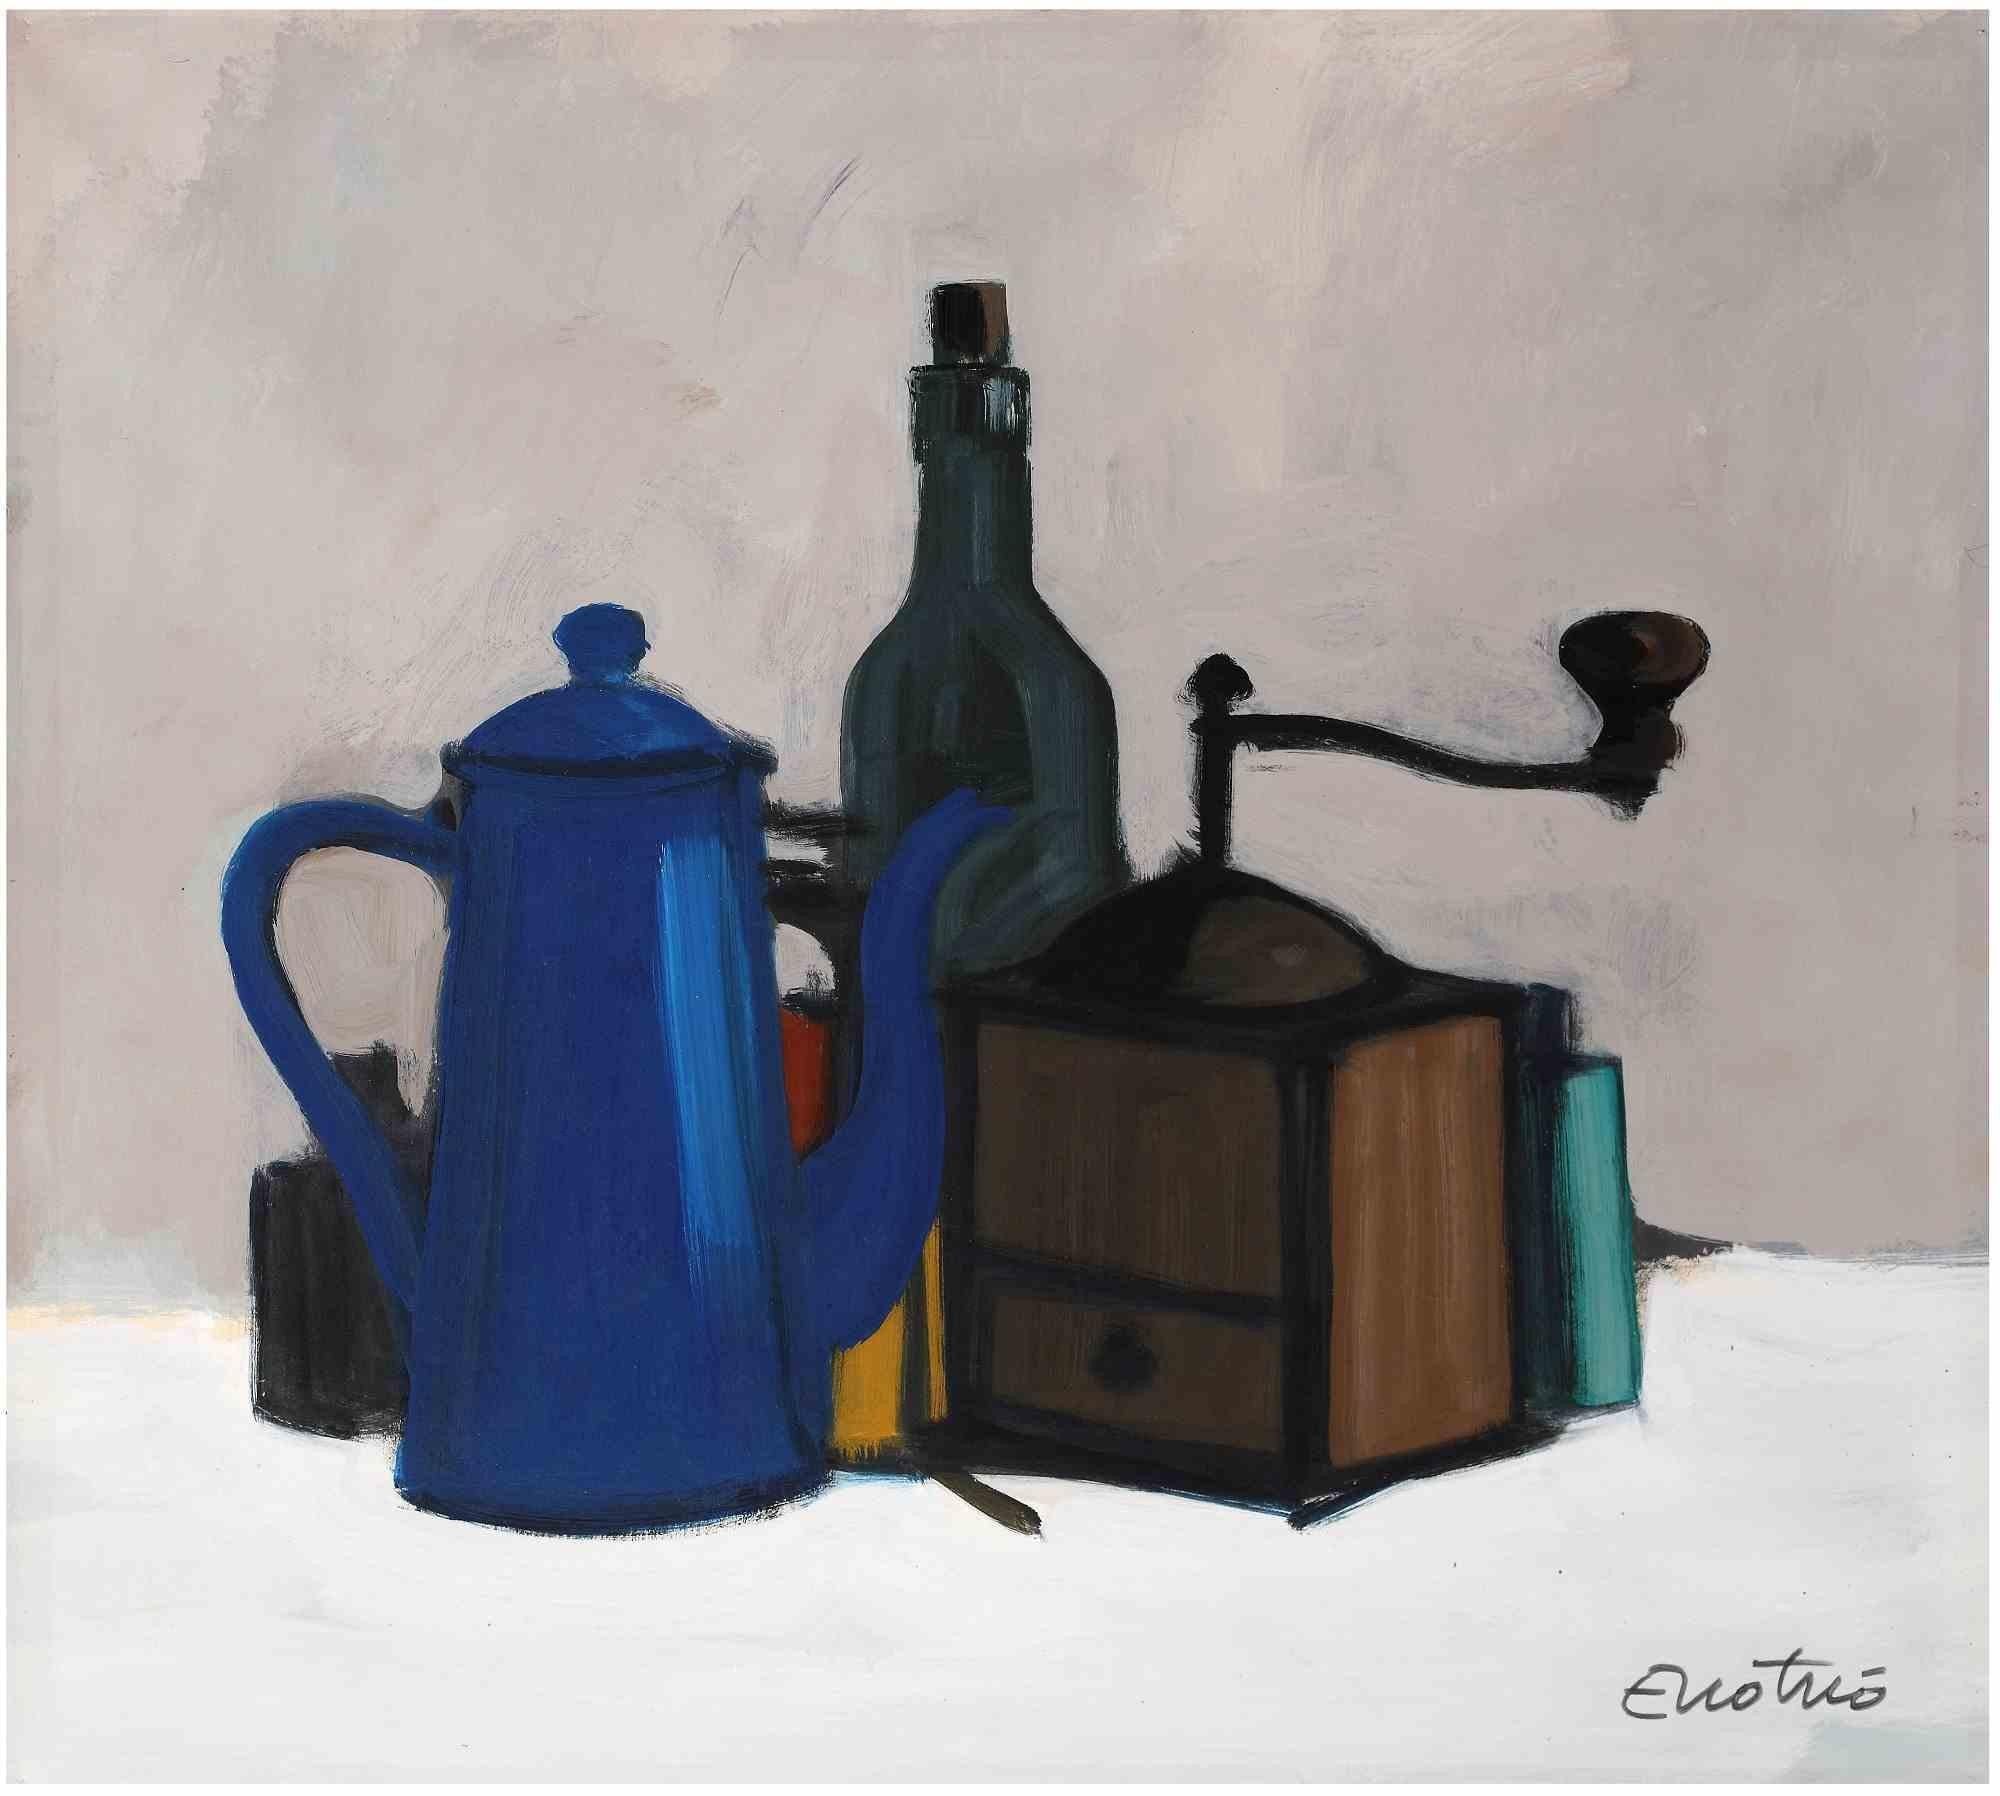 Still Life with Grinder is an modern artwork realized by the artist Enotrio in the late 20th Century.

Mixed colored tempera on paper.

Hand signed on the lower margin.

Sketches by the artist on the back.

Enotrio Pugliese (Buenos Aires 1920 –